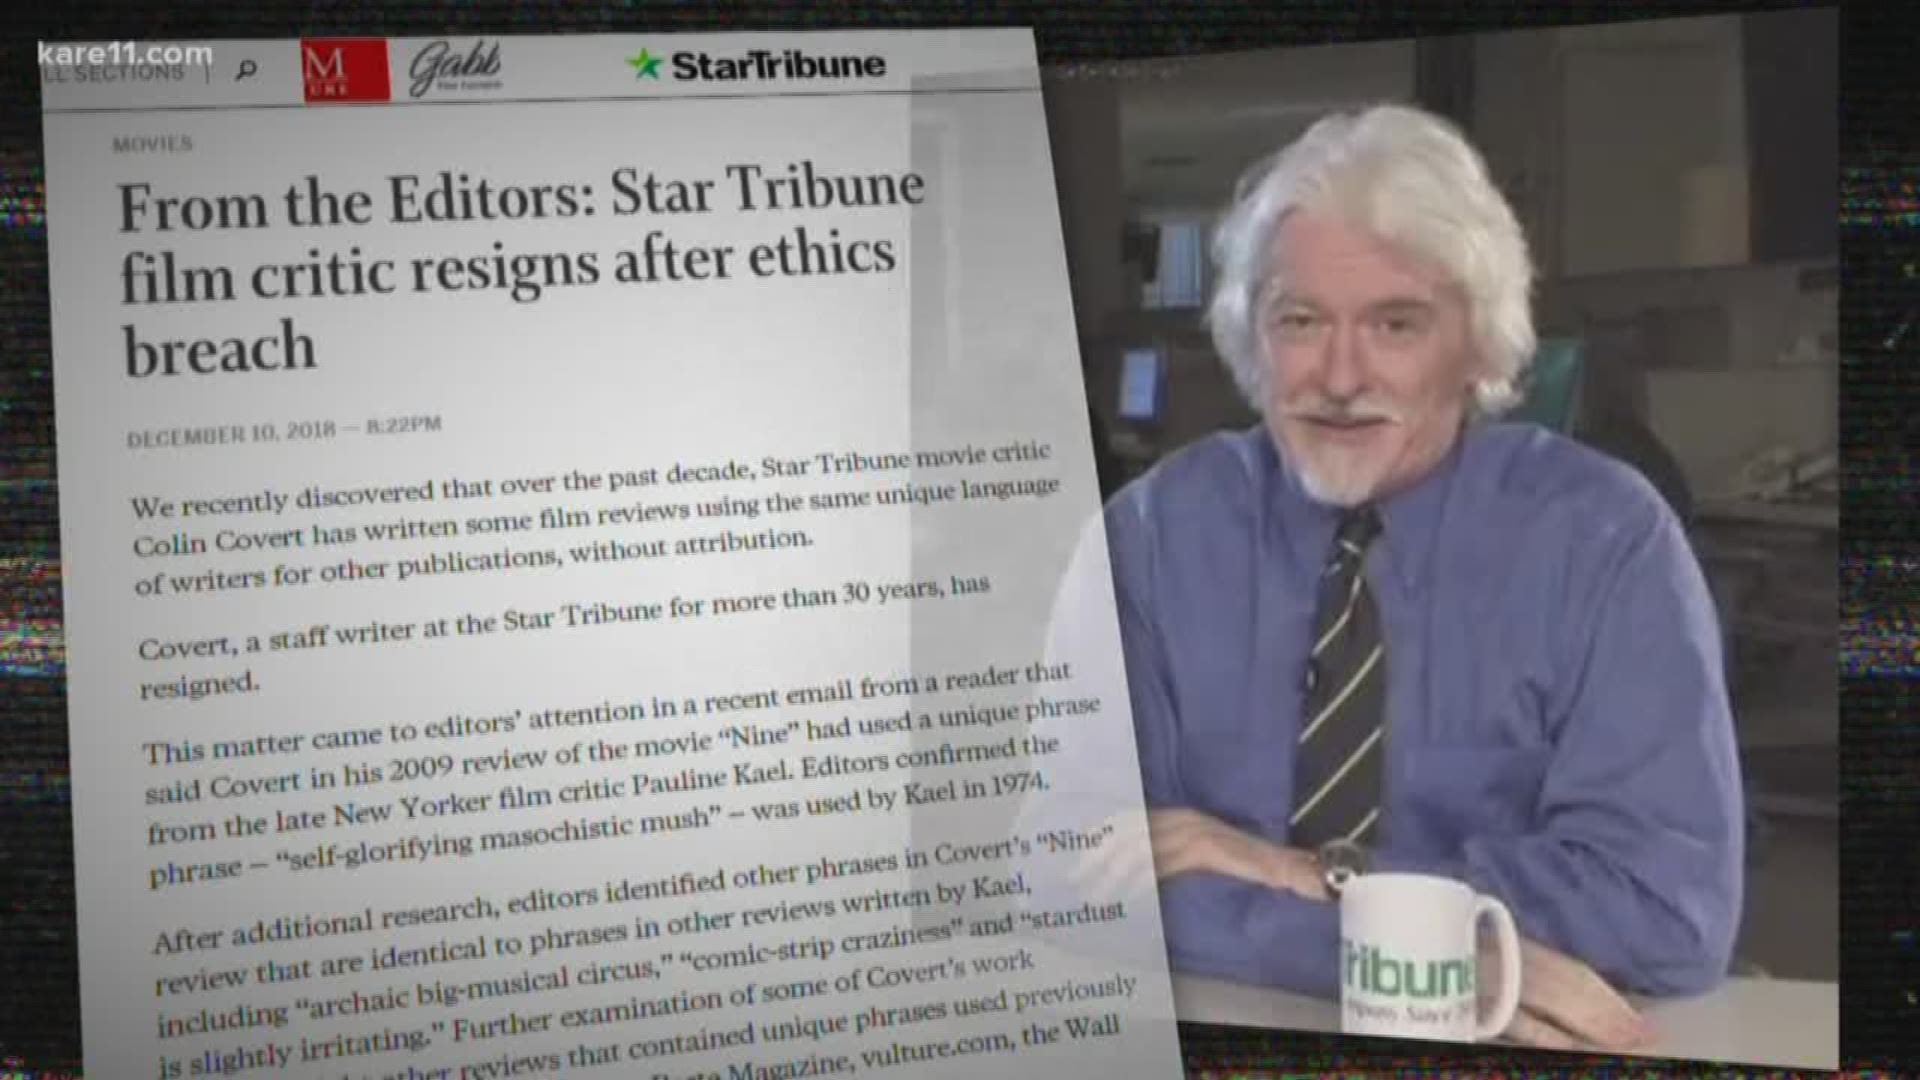 After more than 30 years, Colin Covert has resigned as the Star Tribune's film critic. The newspaper launched an investigation into Covert's reviews after discovering that particular phrases had been plagiarized from major publications. https://kare11.tv/